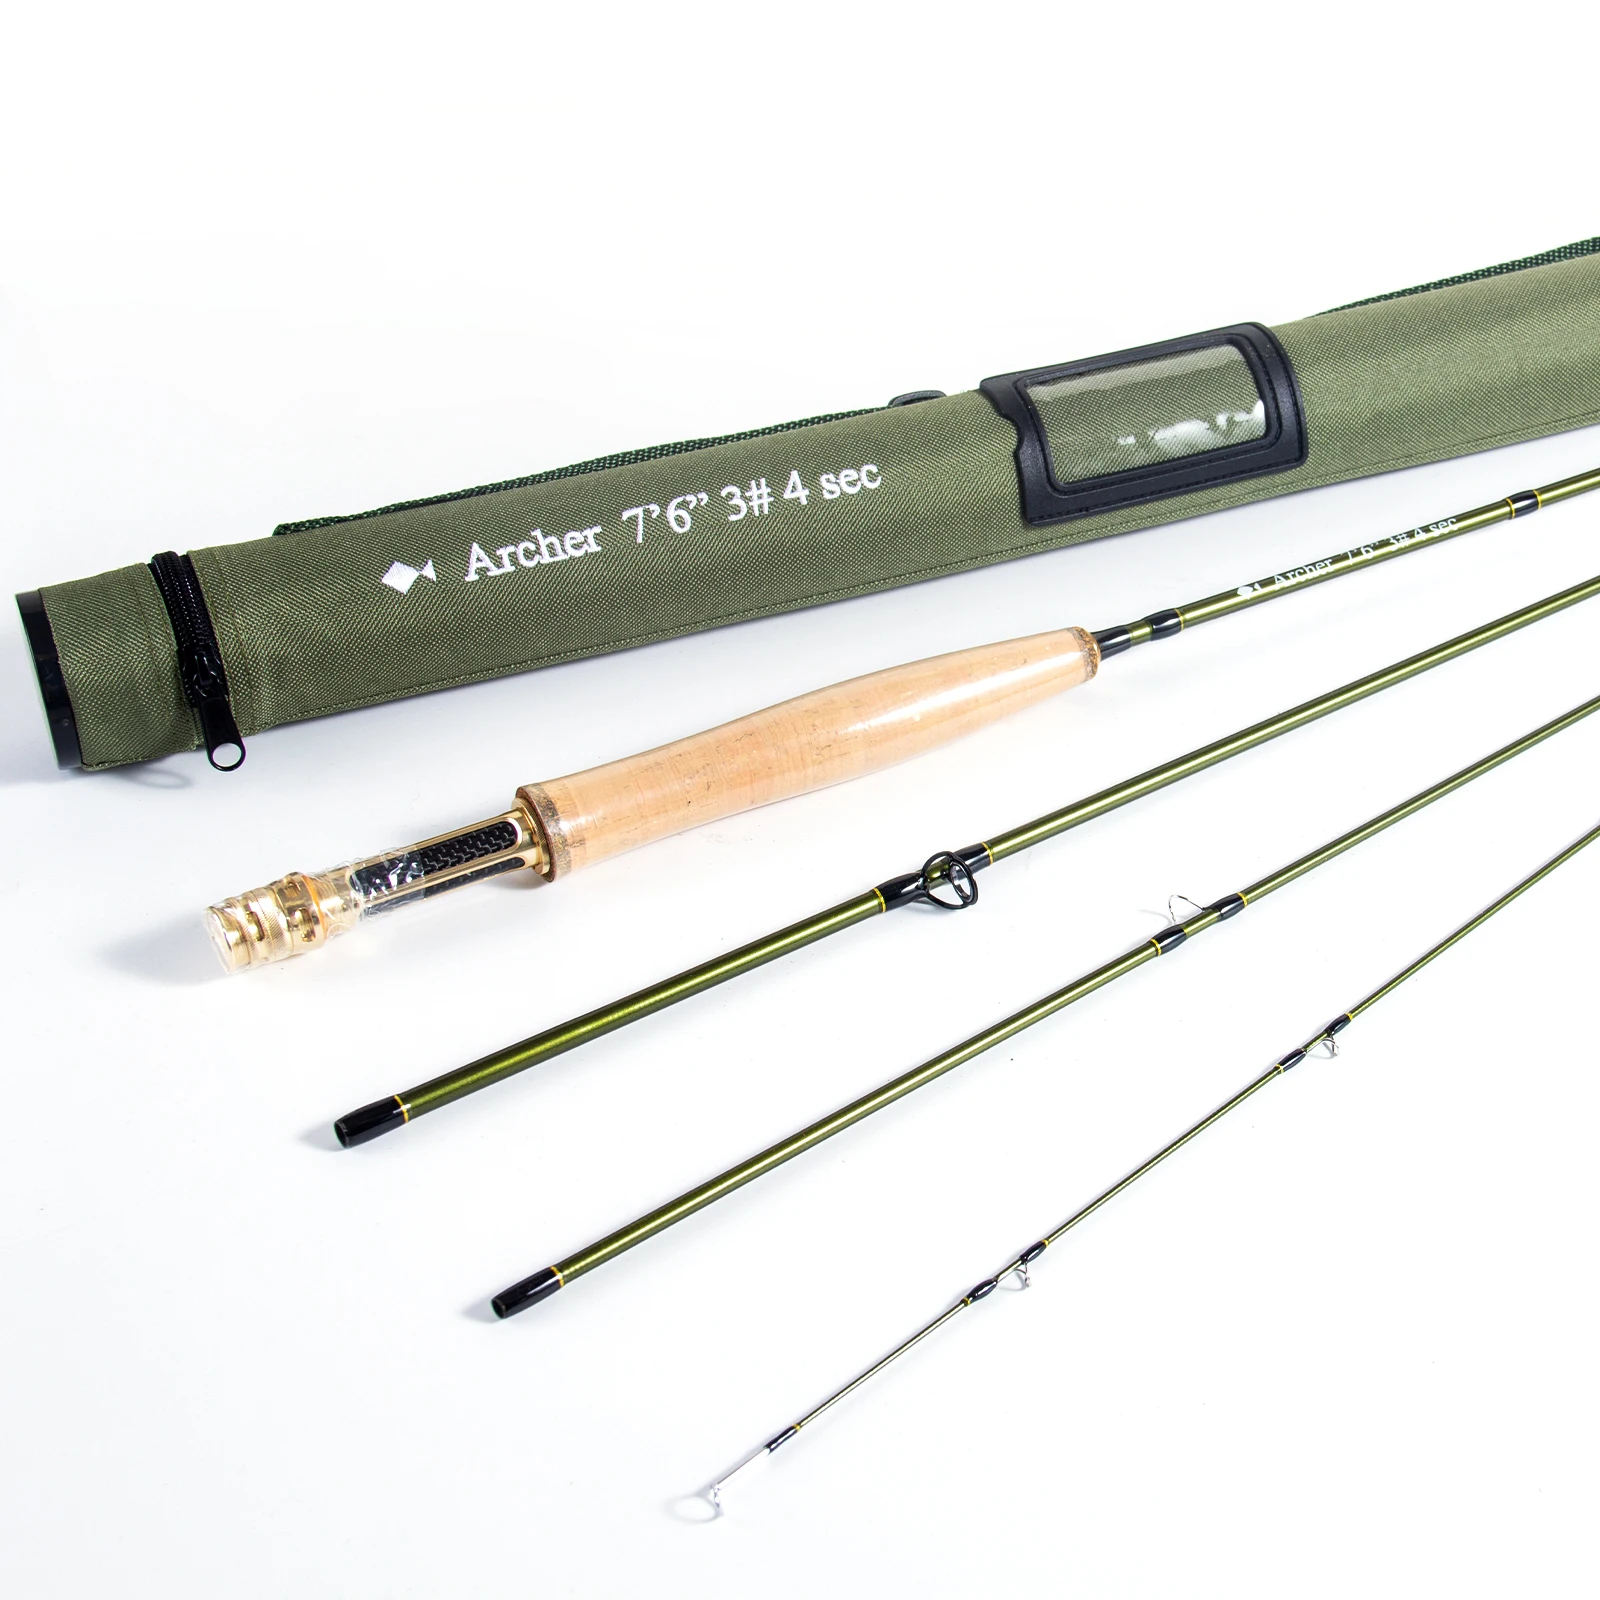 3/4/5/8 WT Fly Fishing Rod 7.5/8.3/ 9FT Fast Action 36T Carbon Fiber (IM10)  Fly Fishing Rod with Cordura Tube - AliExpress